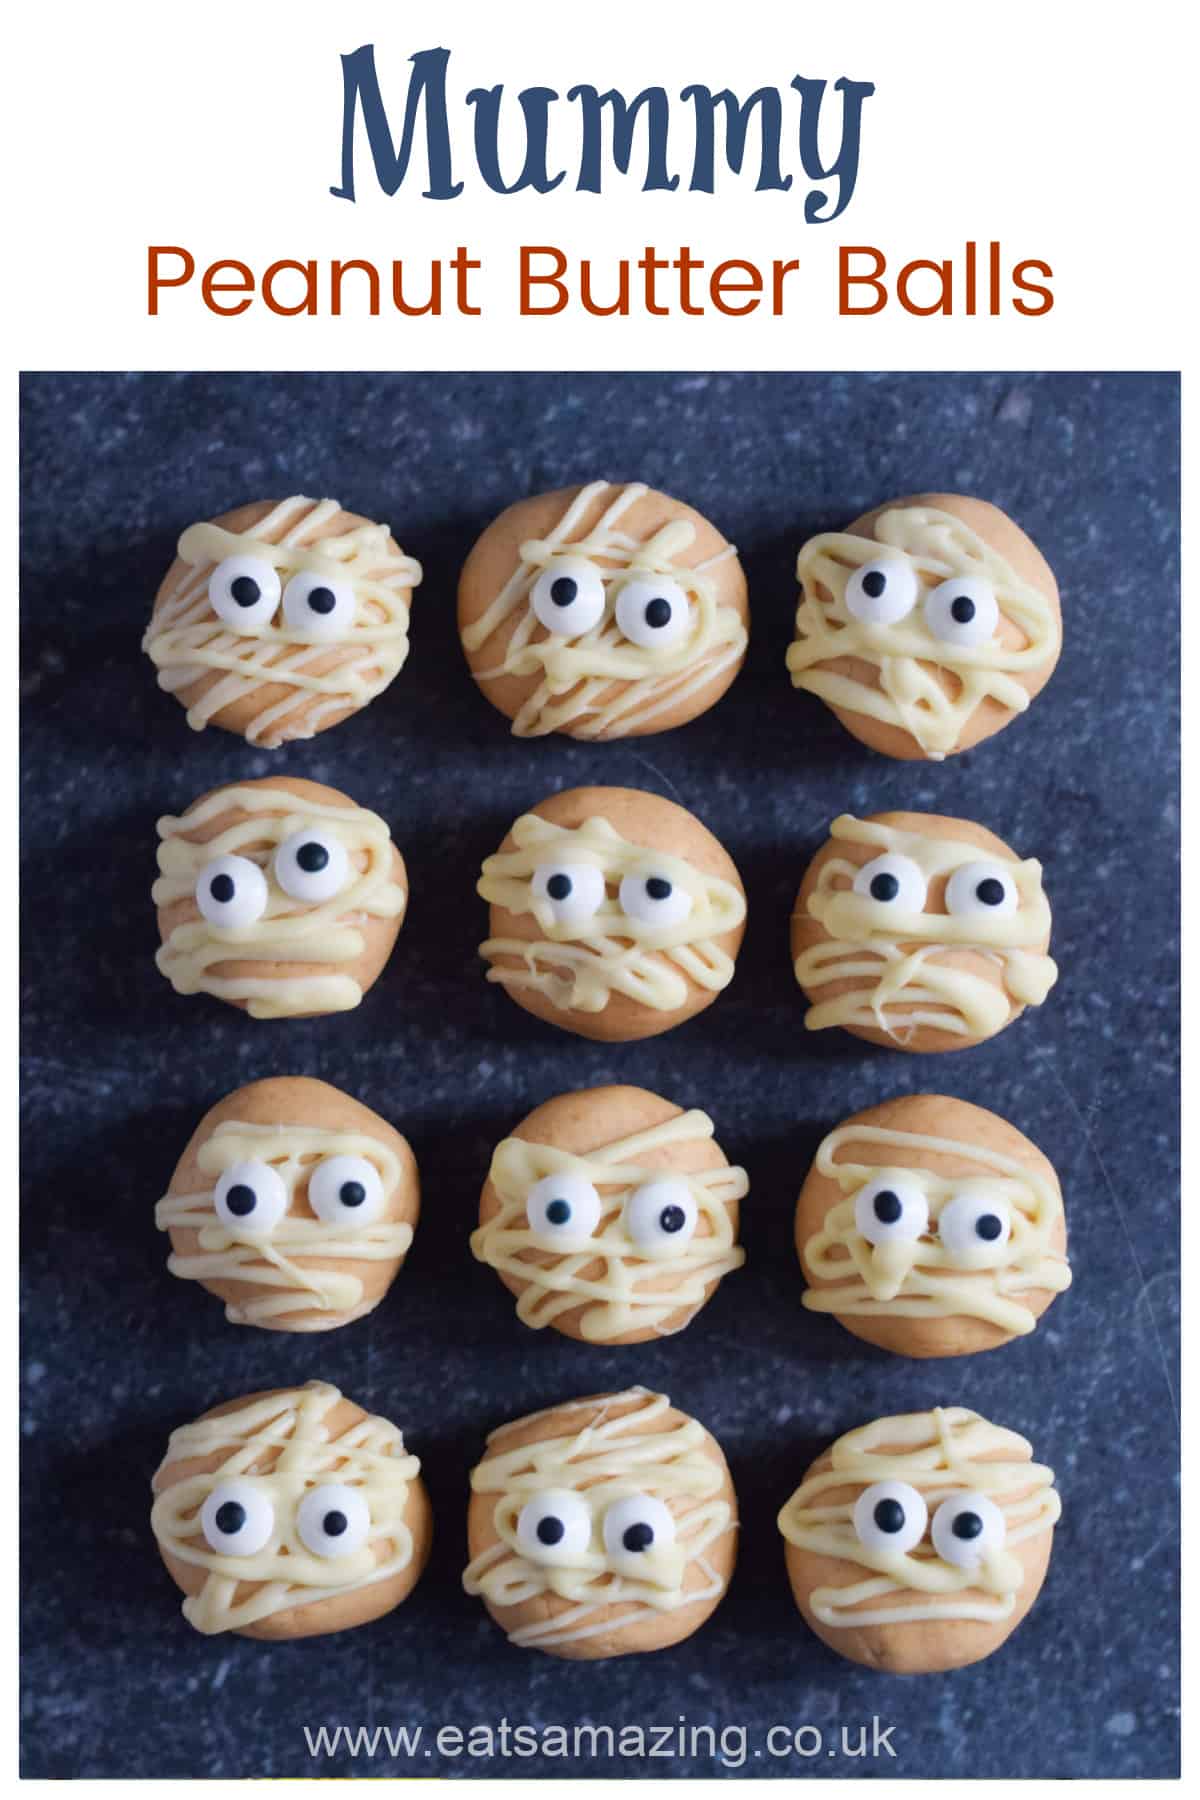 How to make cute and easy Mummy Peanut Butter Balls - fun Halloween recipe for kids